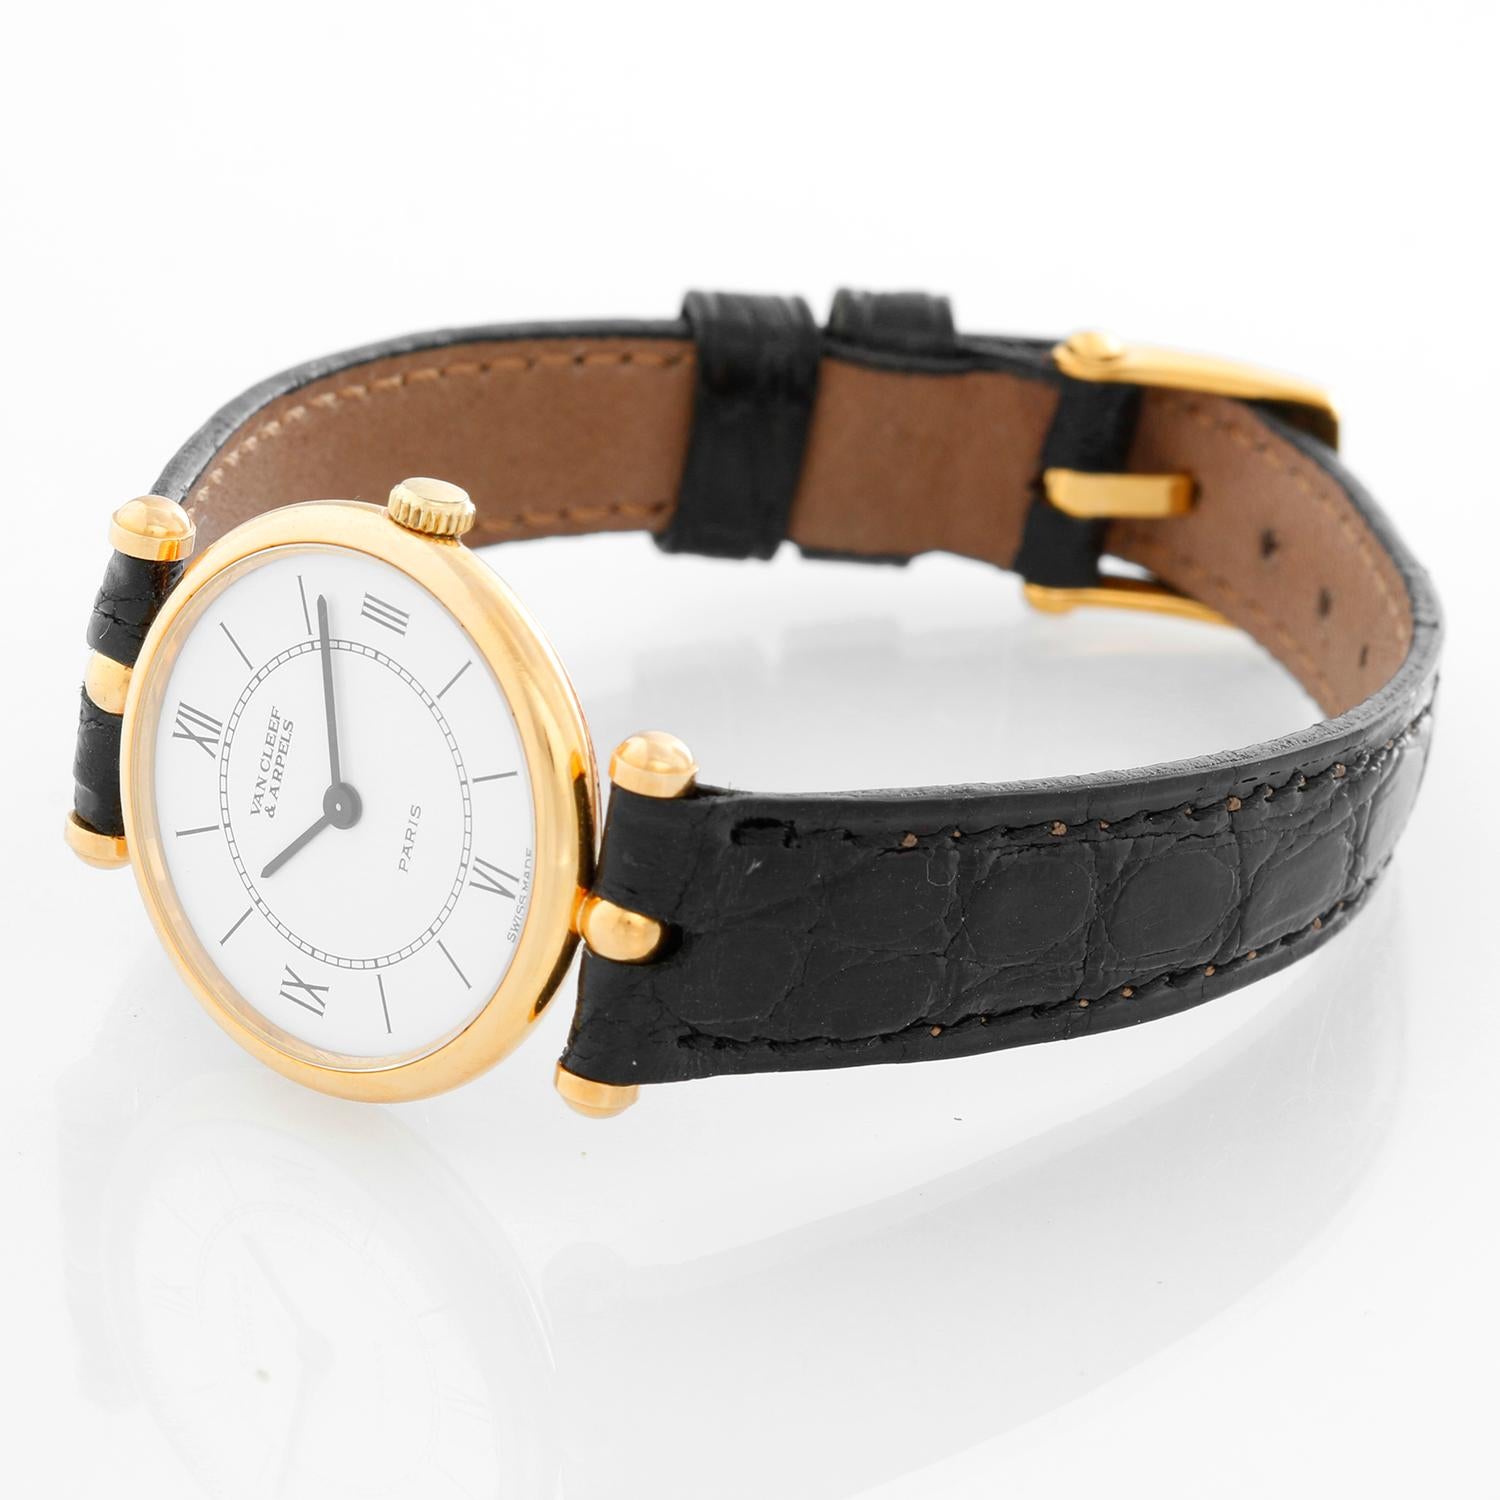 Van Cleef & Arpels Classique Ladies Watch - Quartz. 14K Yellow Gold ( 24 mm ). Flat white dial with stick hour markers and Roman numeral markers at 12, 3, 6, and 9 o'clock. Alligator strap with  Van Cleef & Arpels tang buckle. Pre-owned with custom